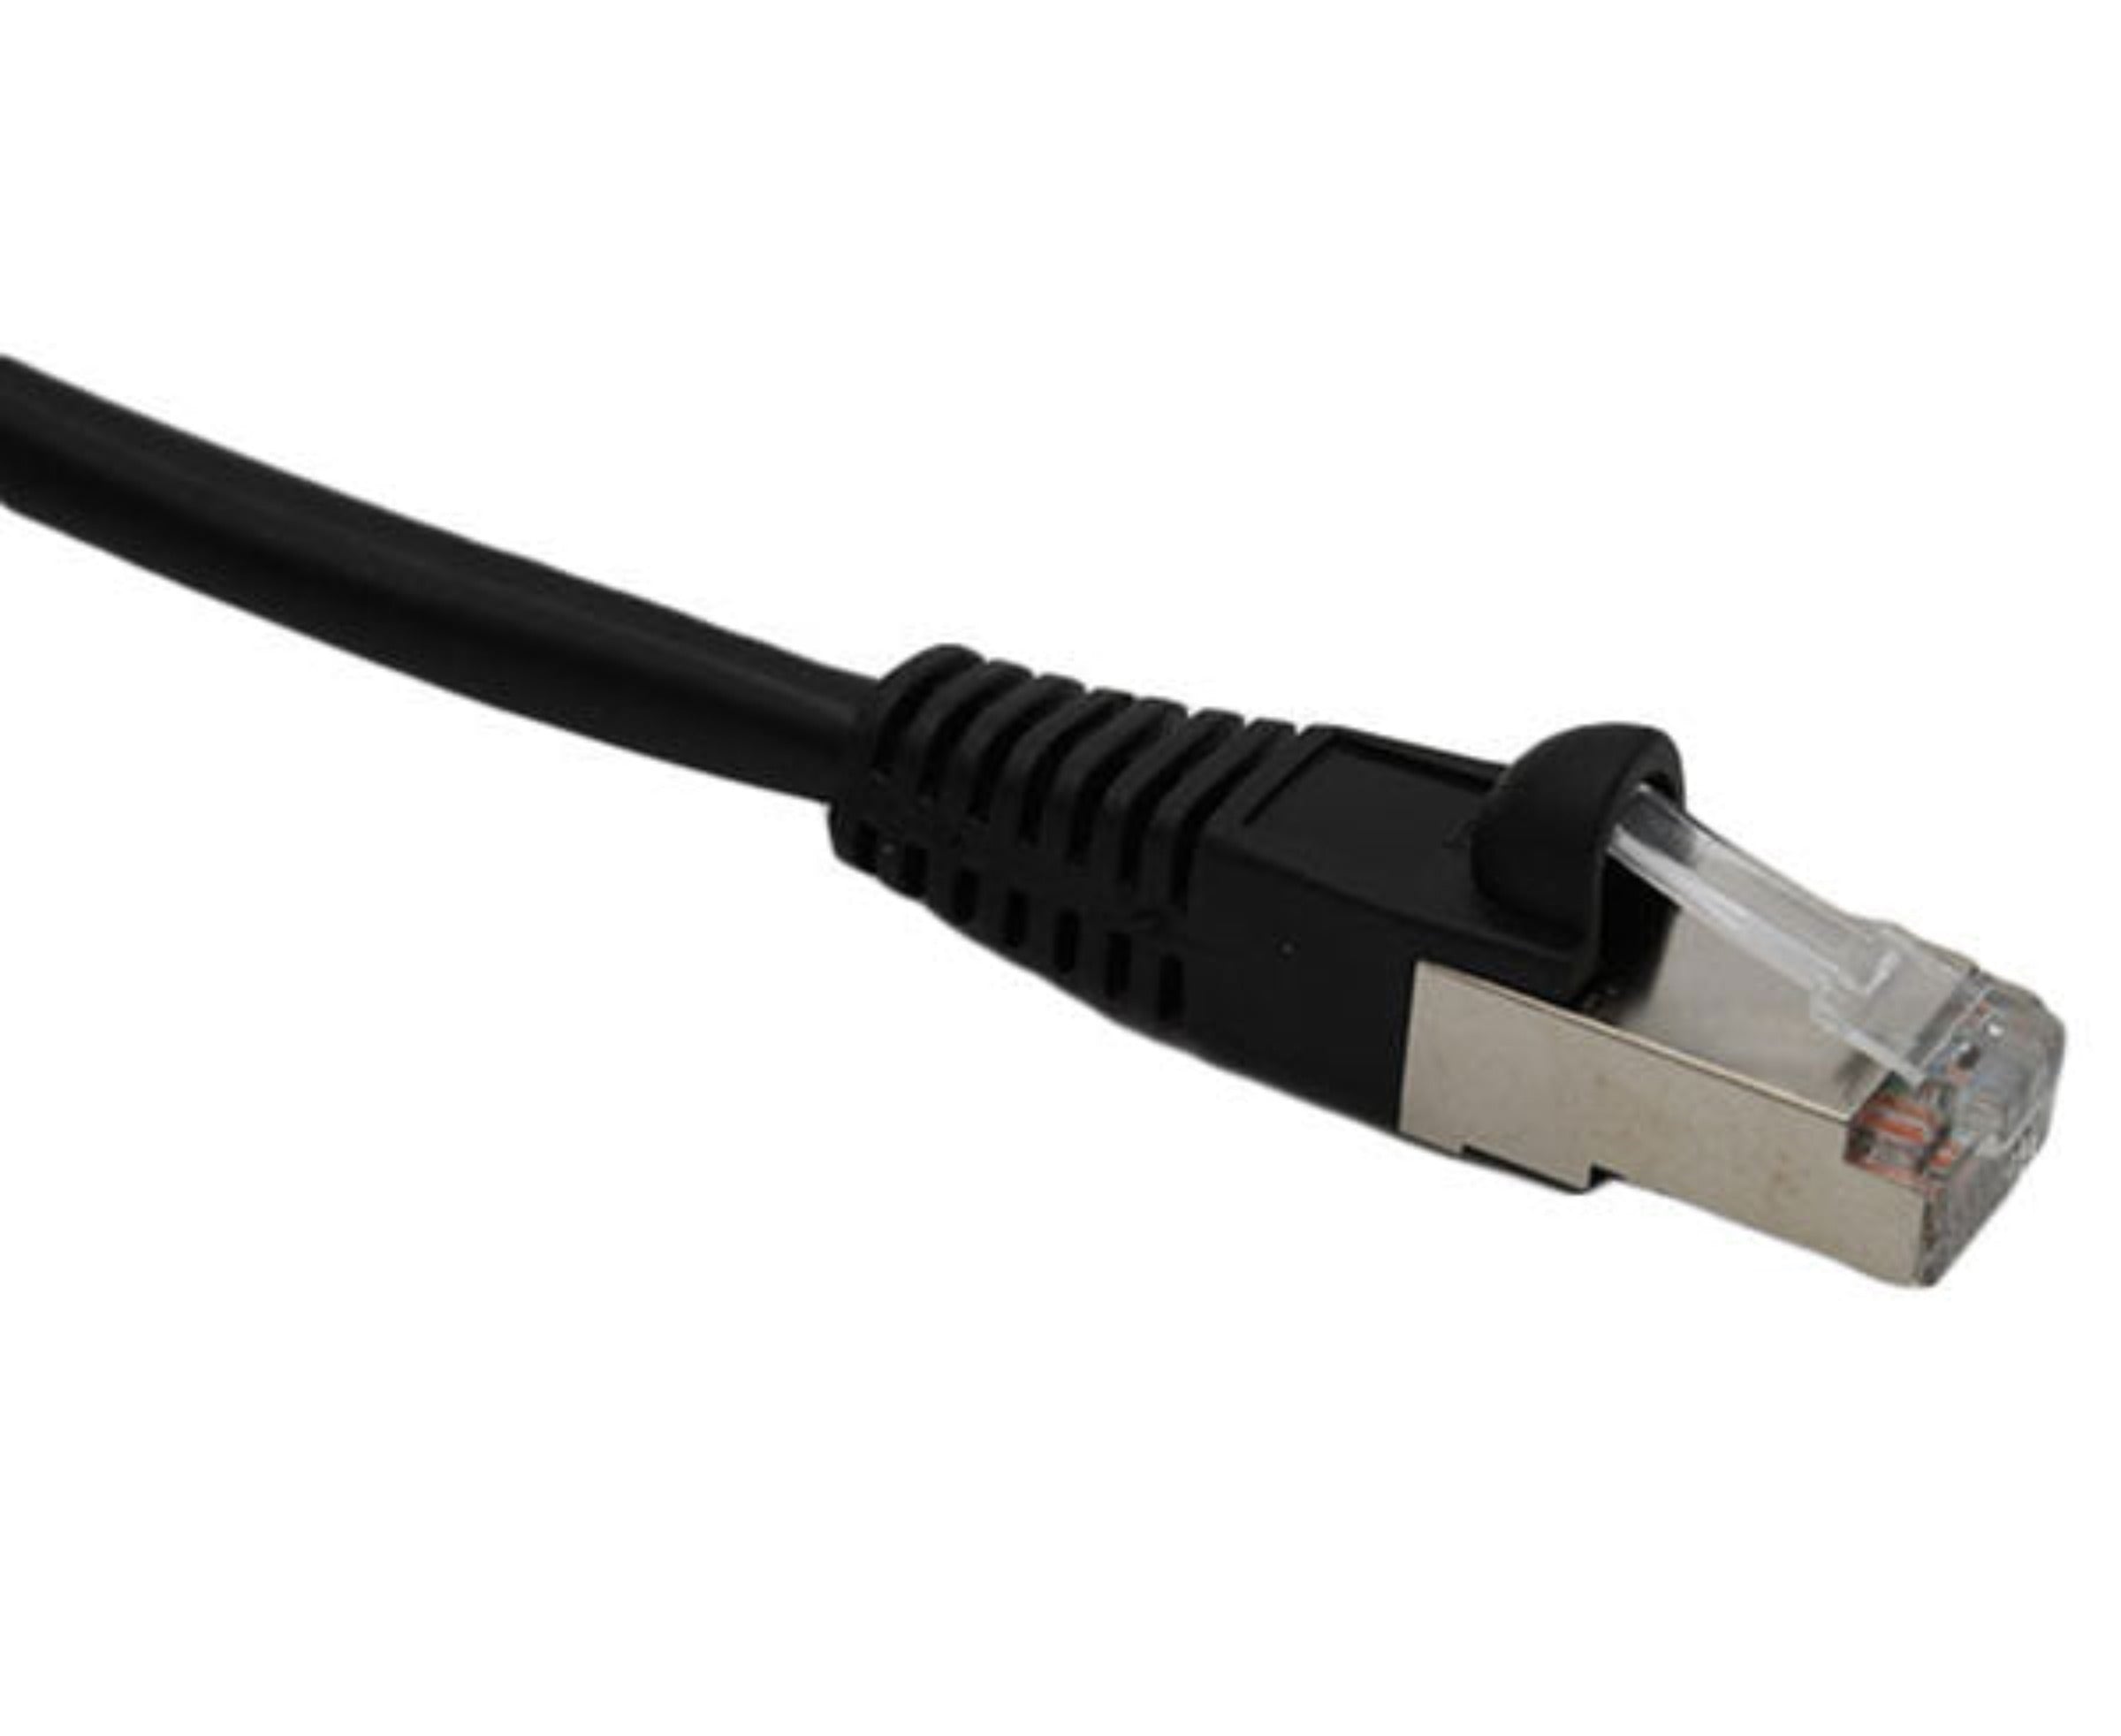 Short 0.5ft Cat5e F/UTP network cable in black against a white backdrop